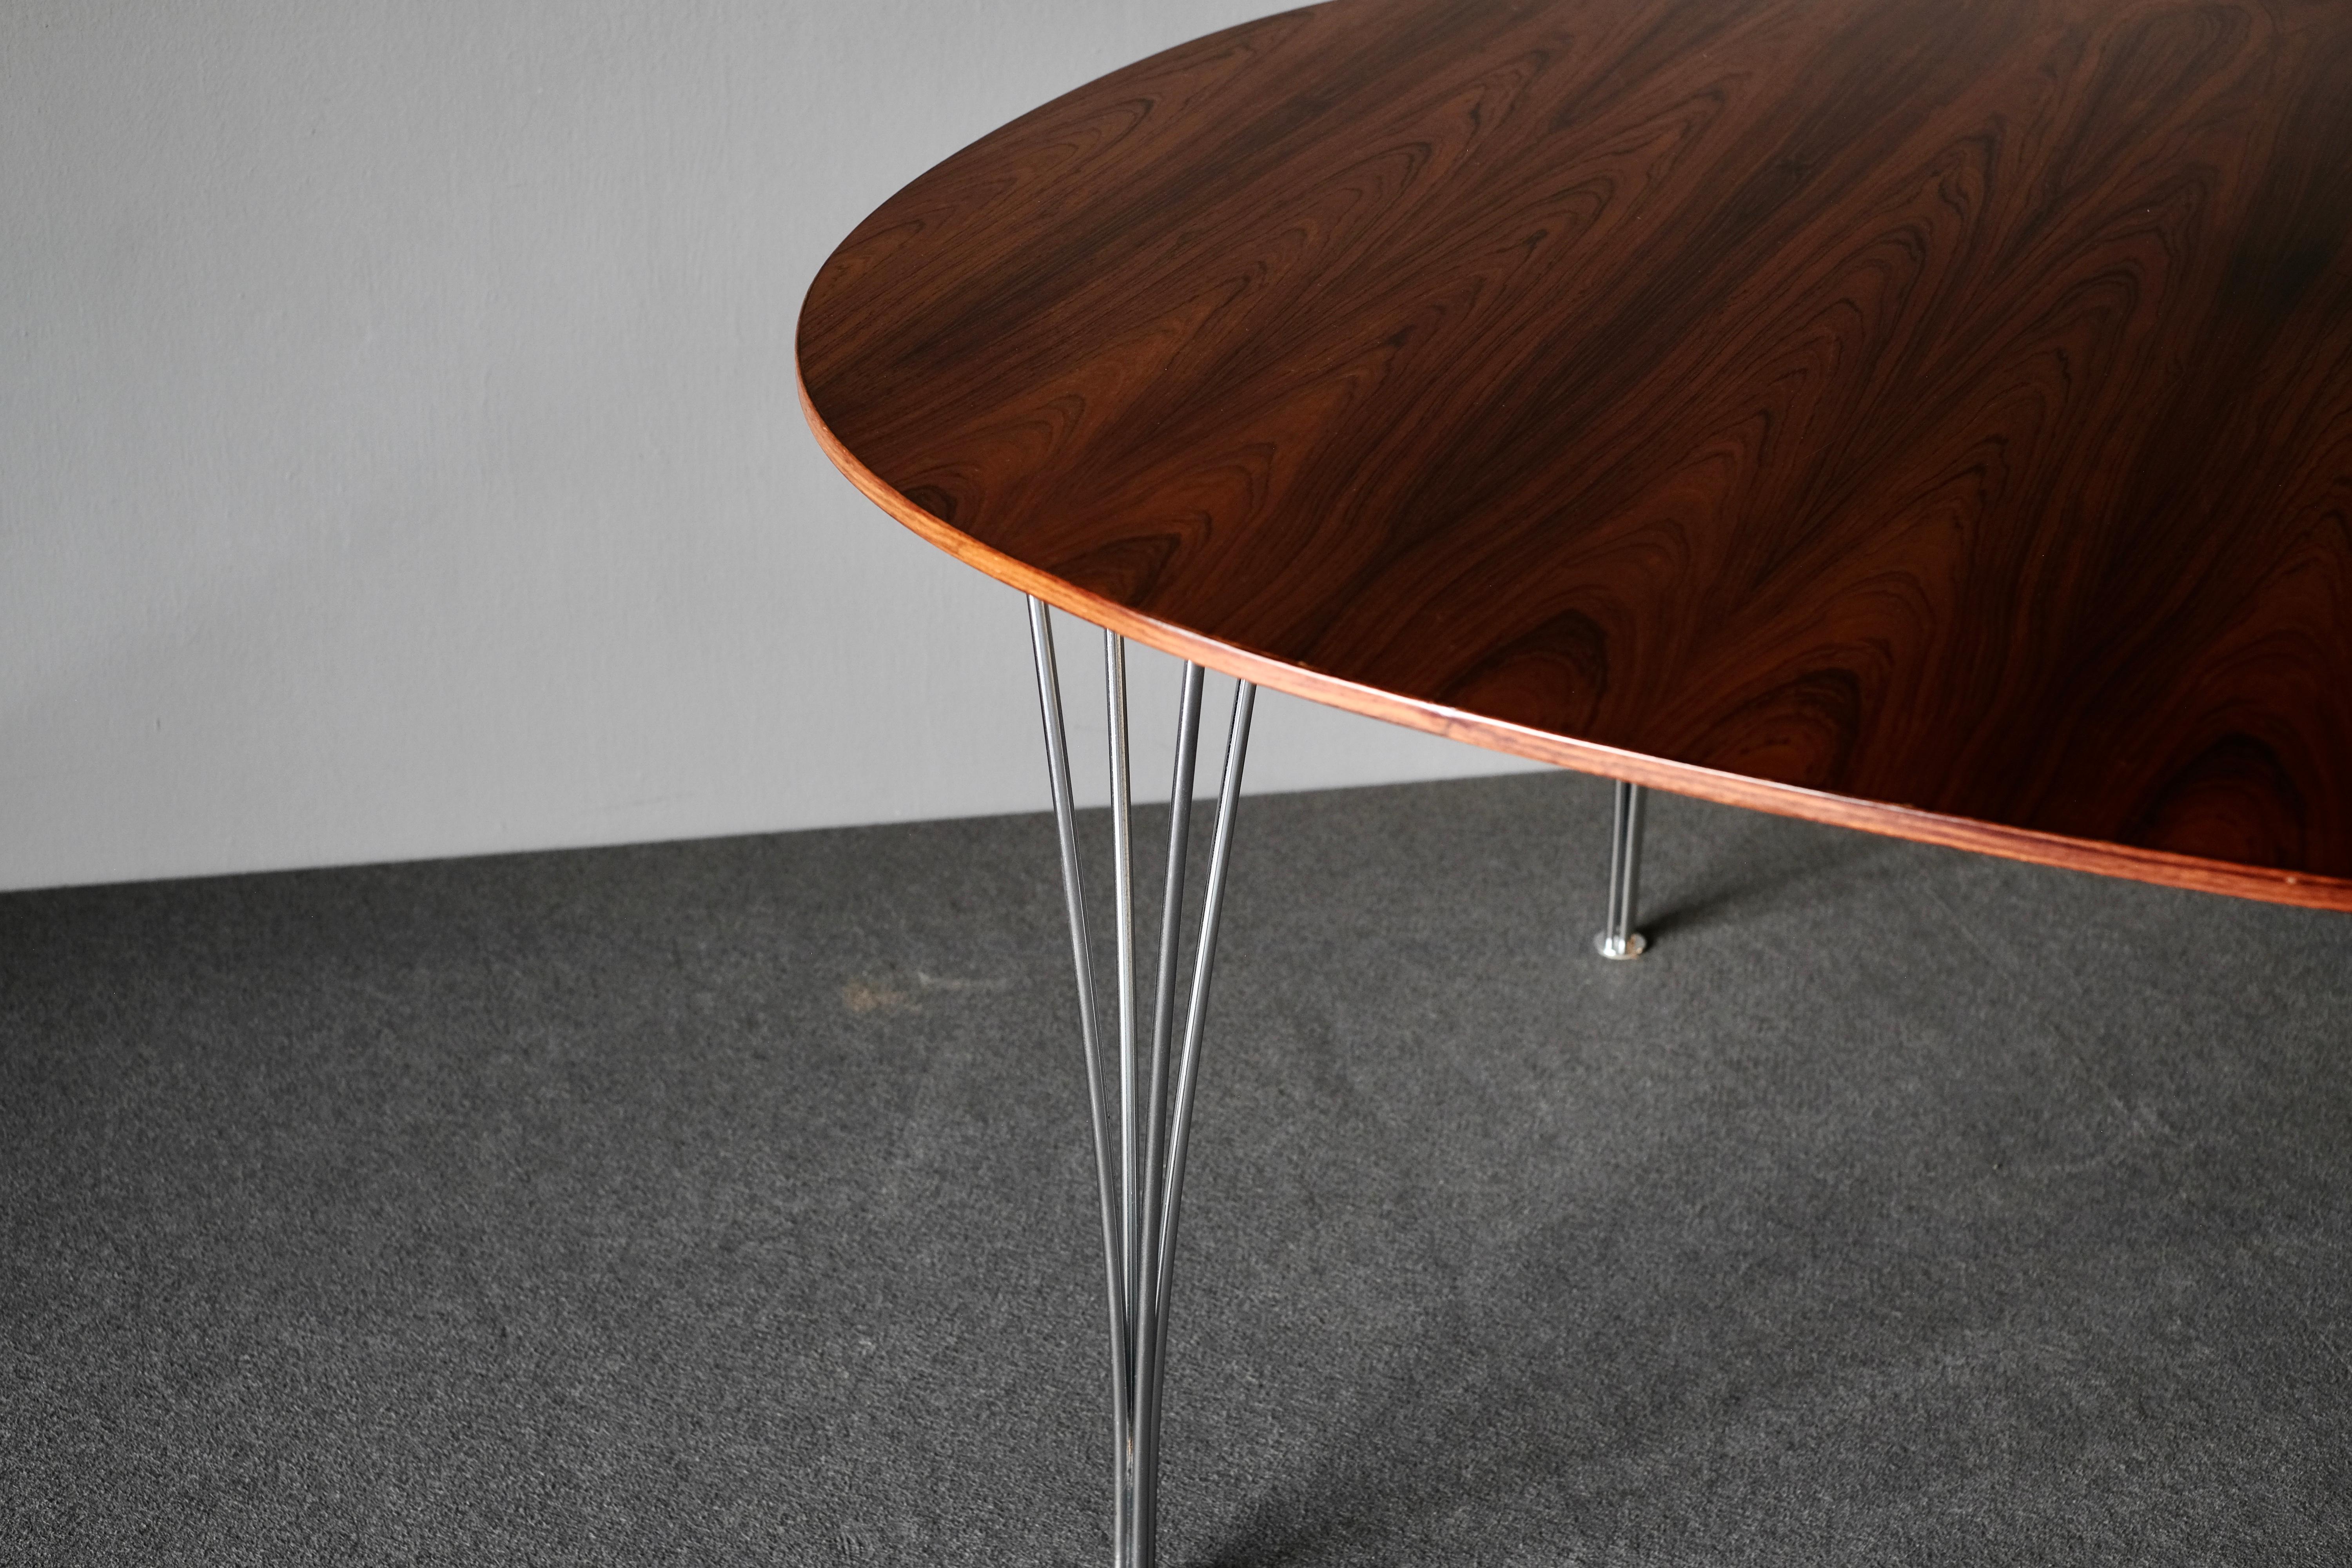 Dining table by designed by Piet Hein and Bruno Mathsson and manufactured by Fritz Hansen. It is in wonderfully patinated Brazilian rosewood and has chromed steel legs. The maker’s mark is stamped on the base.